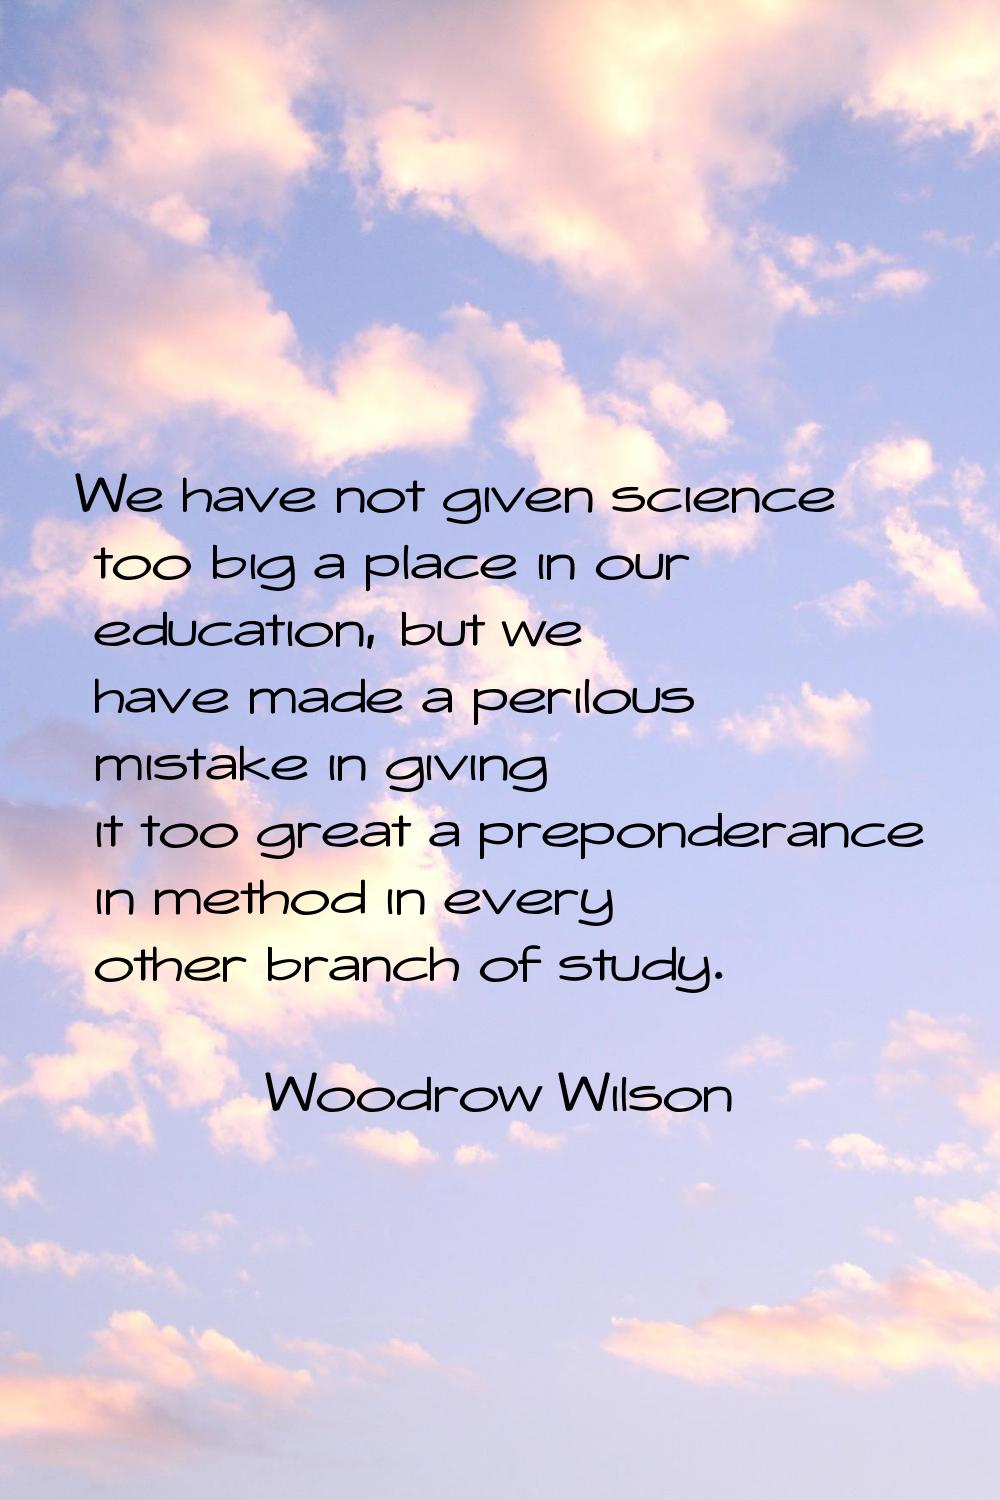 We have not given science too big a place in our education, but we have made a perilous mistake in 